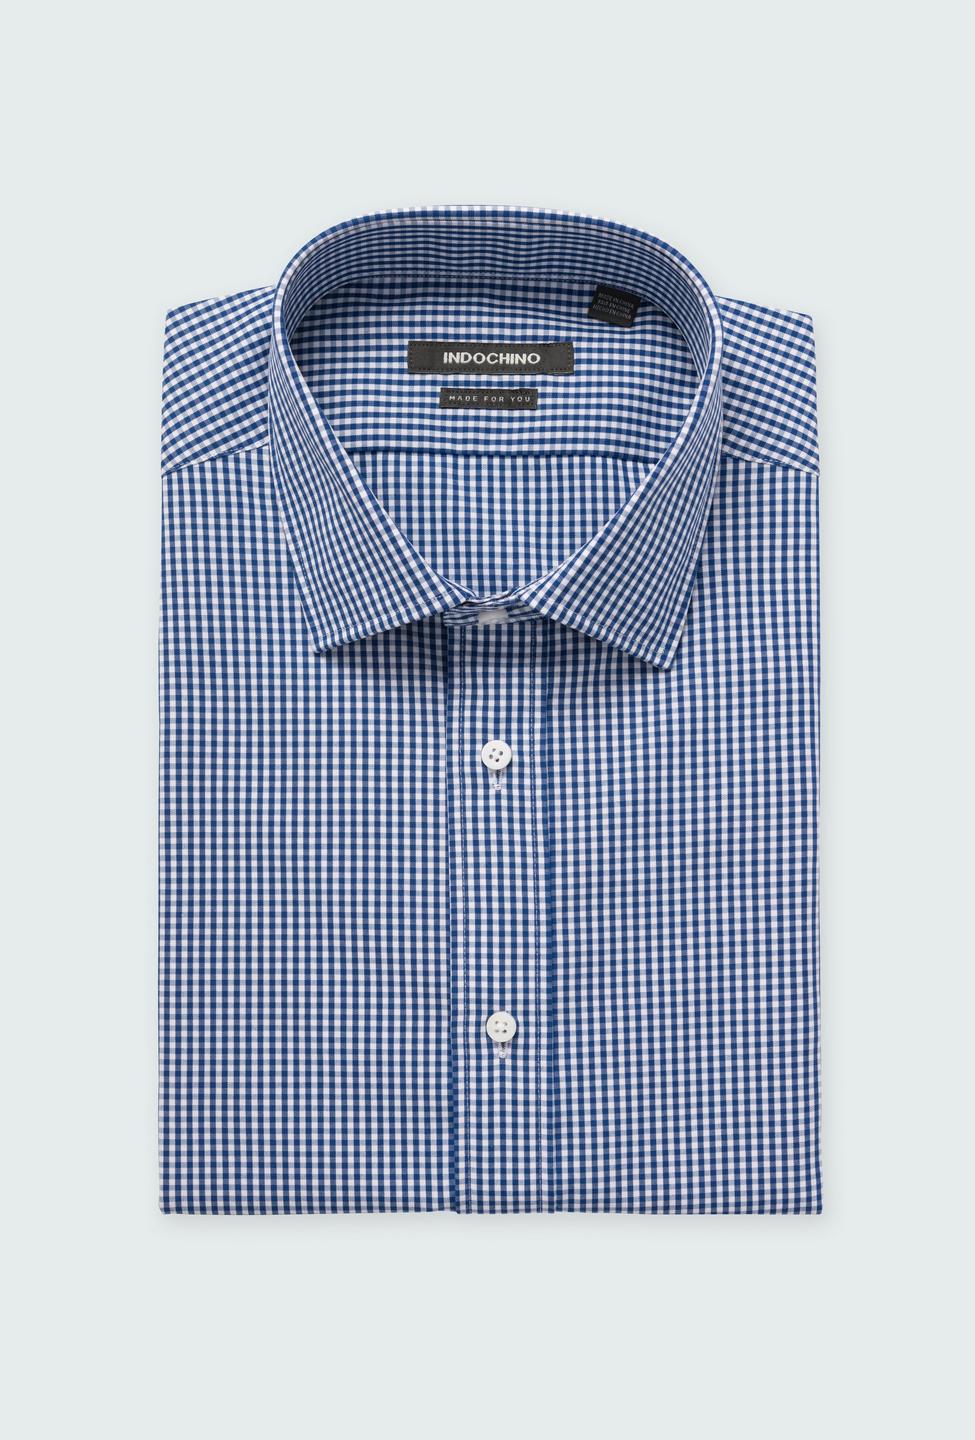 Blue shirt - Helston Checked Design from Premium Indochino Collection